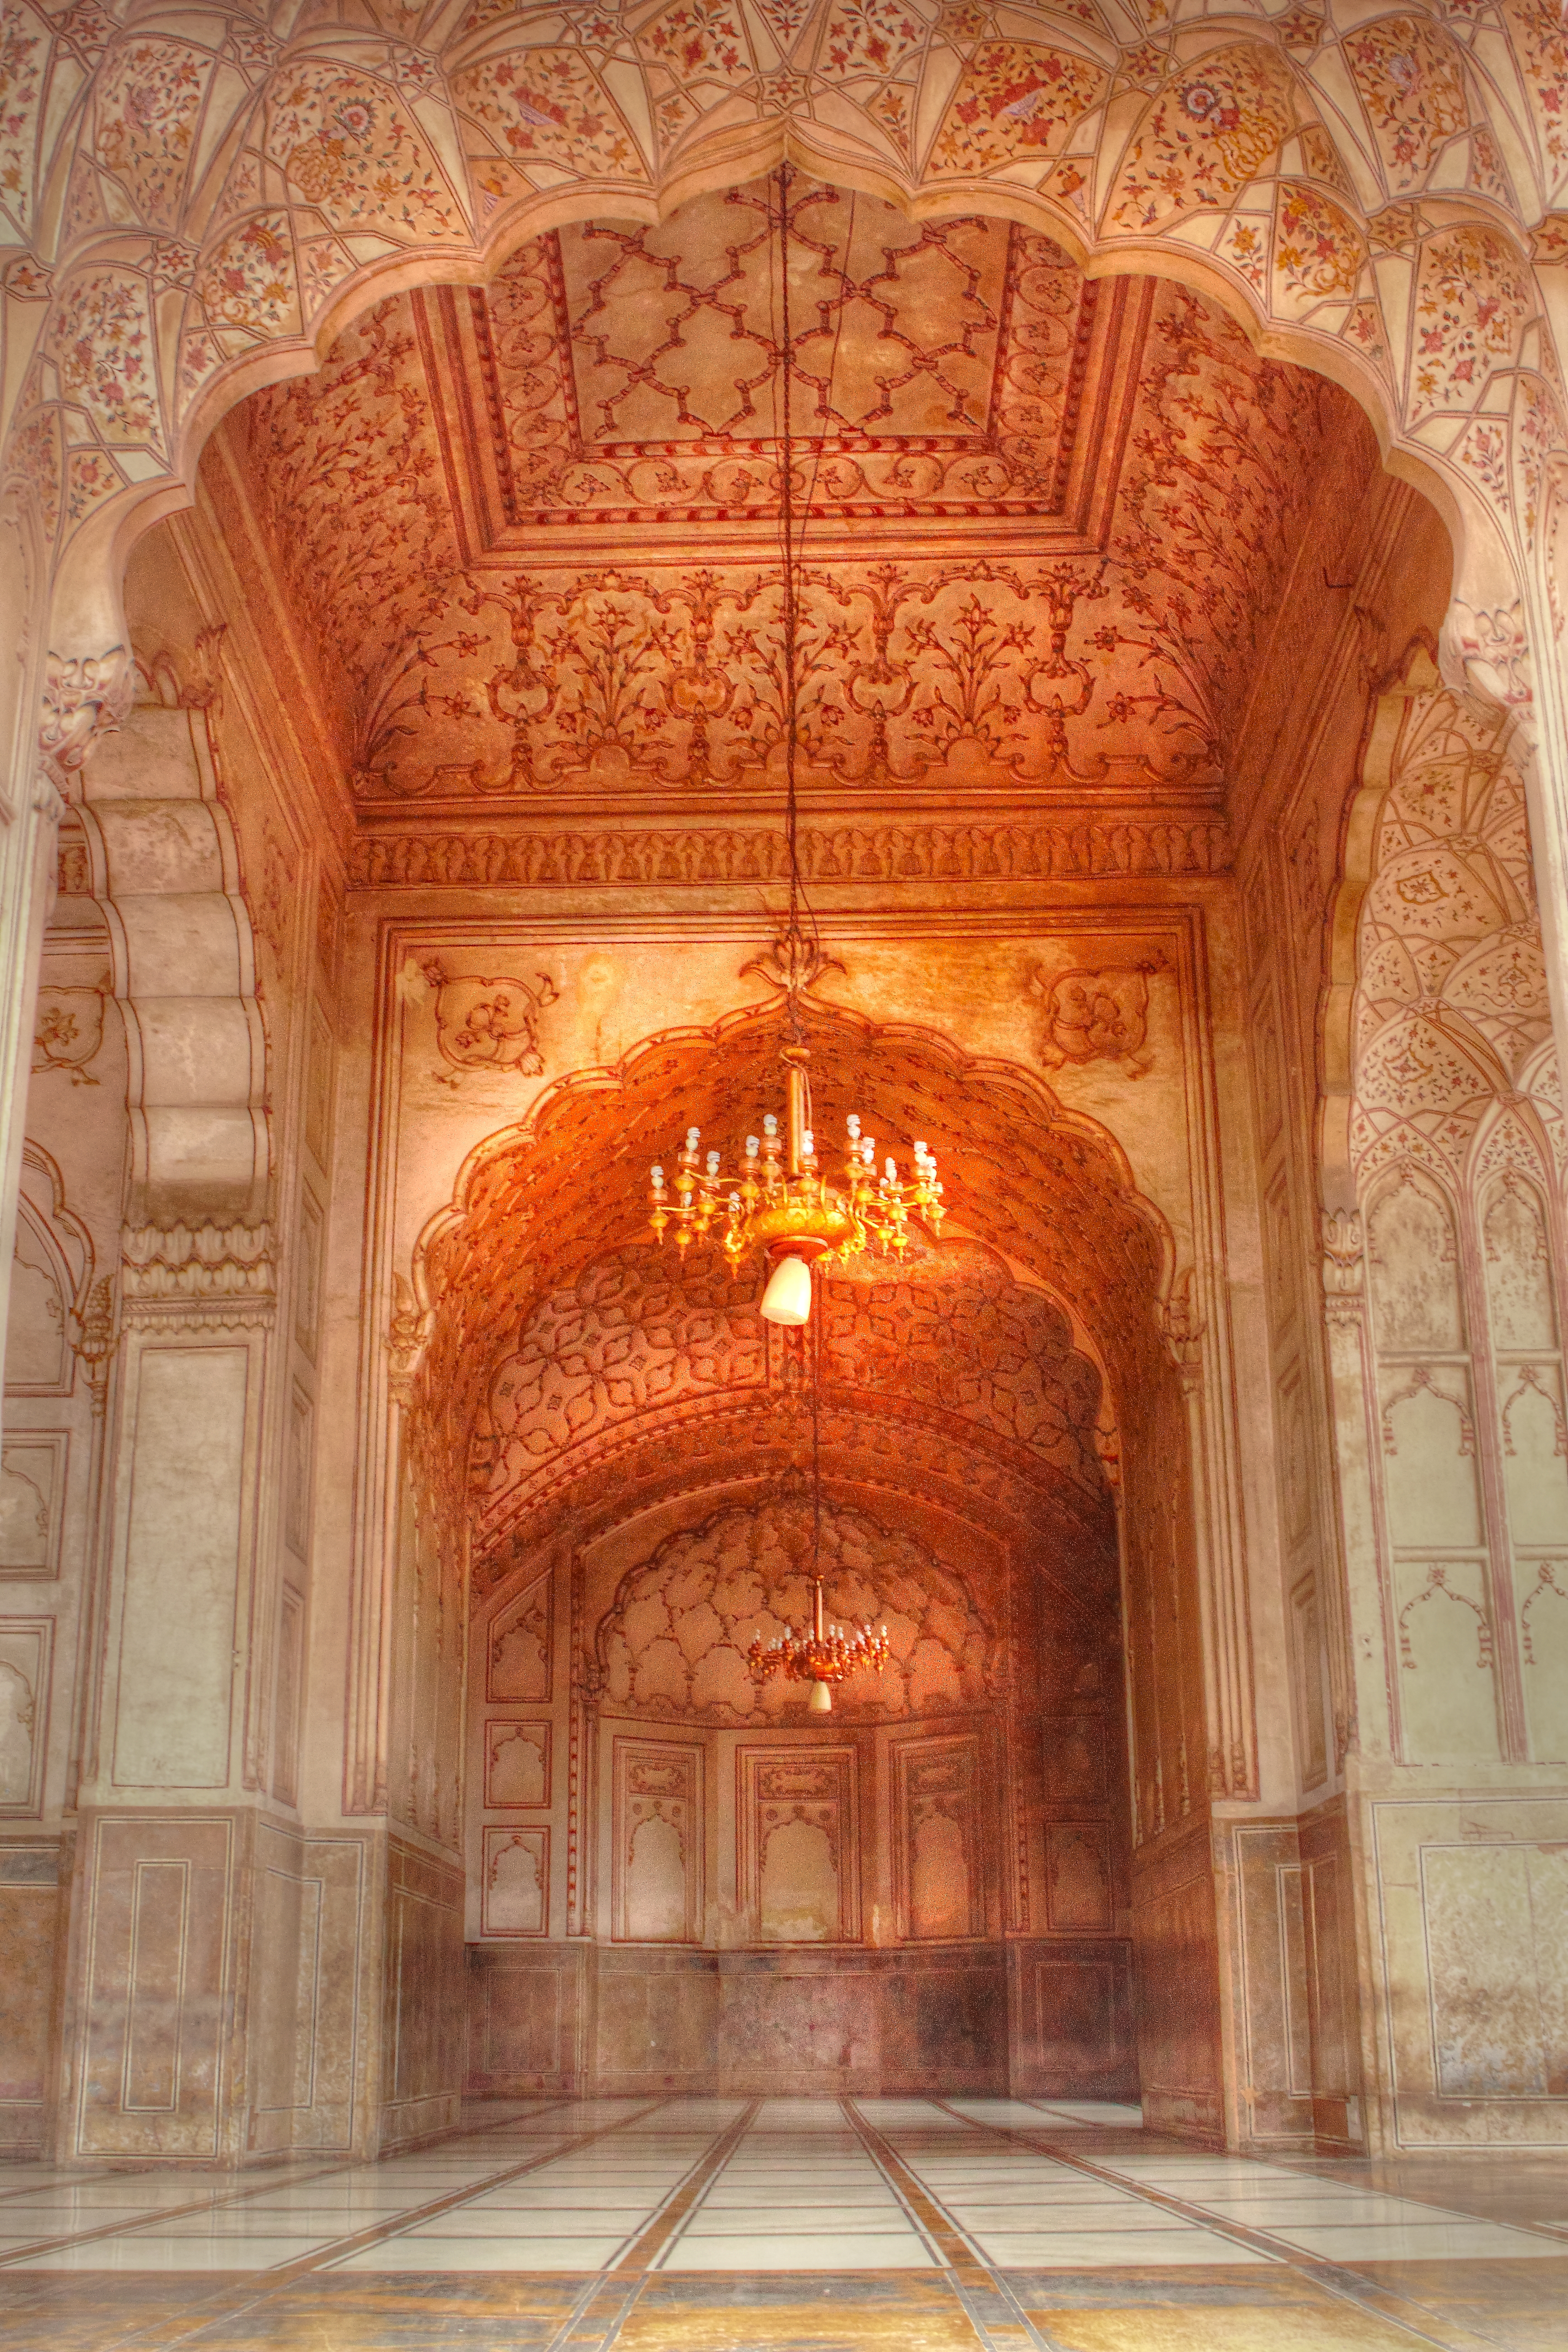 The most beautiful mosques to visit: Badshahi Mosque Interior Ceiling Work, Lahore, Pakistan